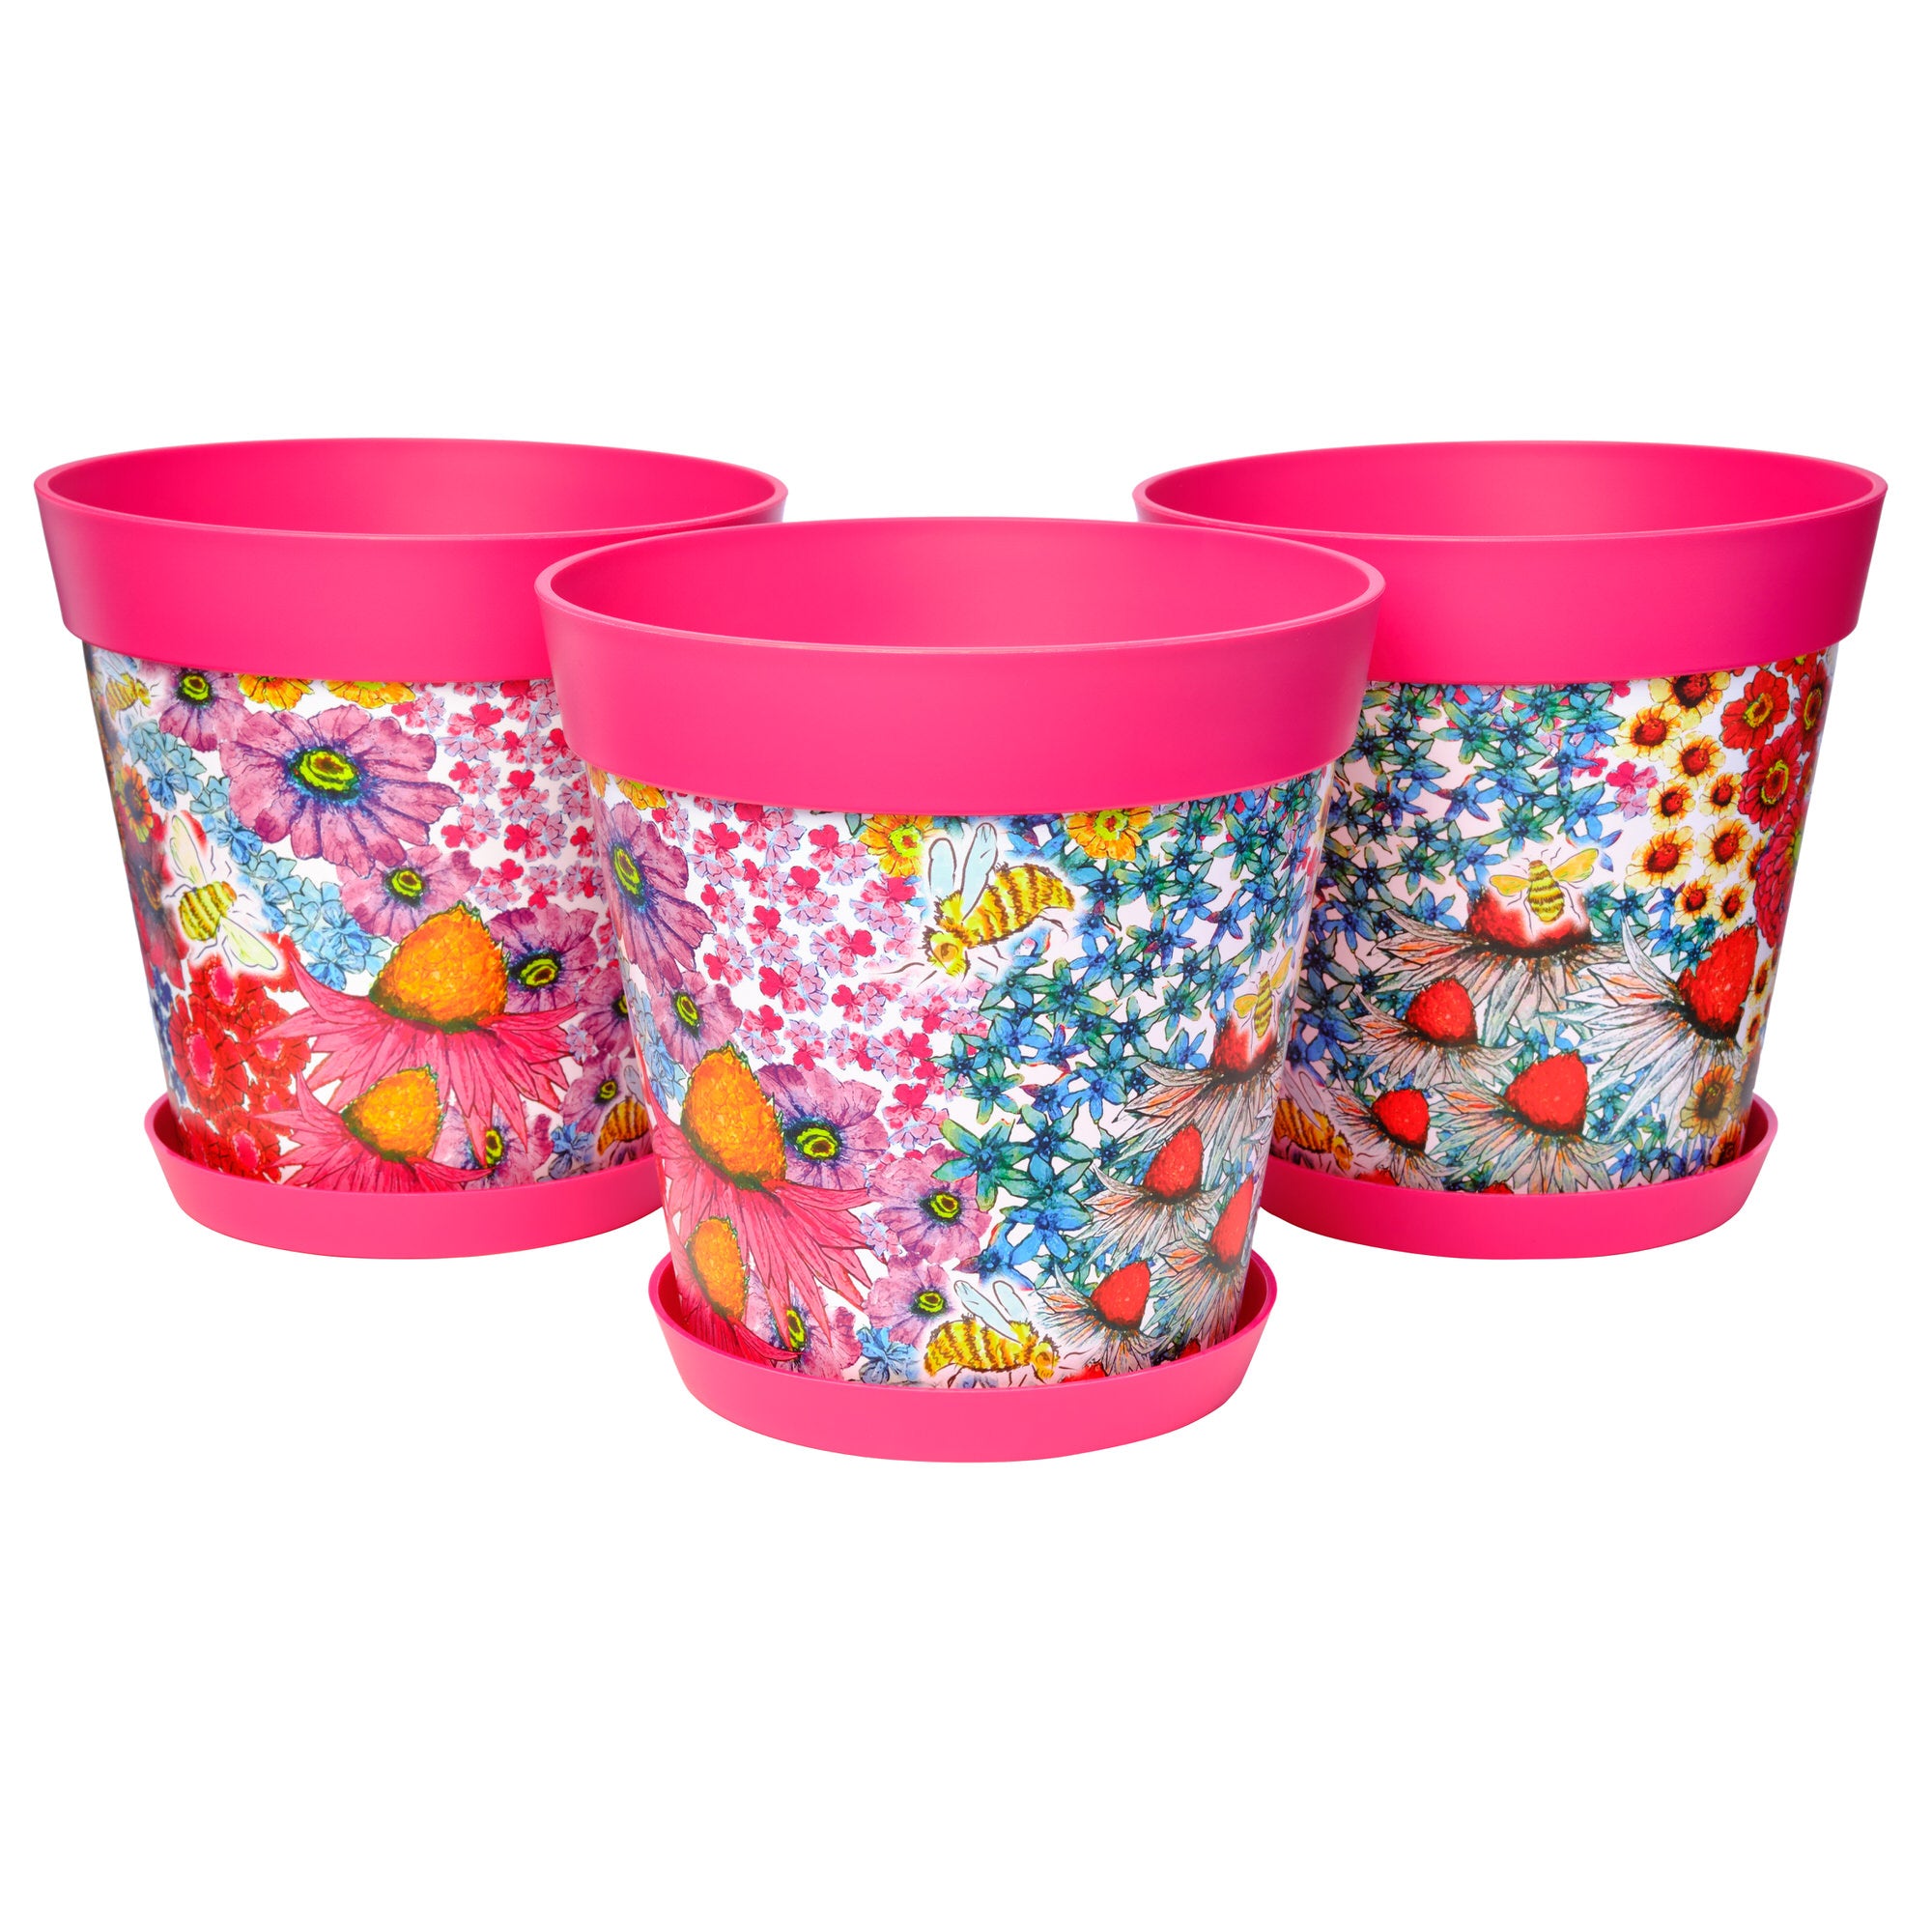 Picture of 3 Large 25cm Plastic Pink Flowers and Bees Pattern Indoor/Outdoor Flowerpots with Saucers 